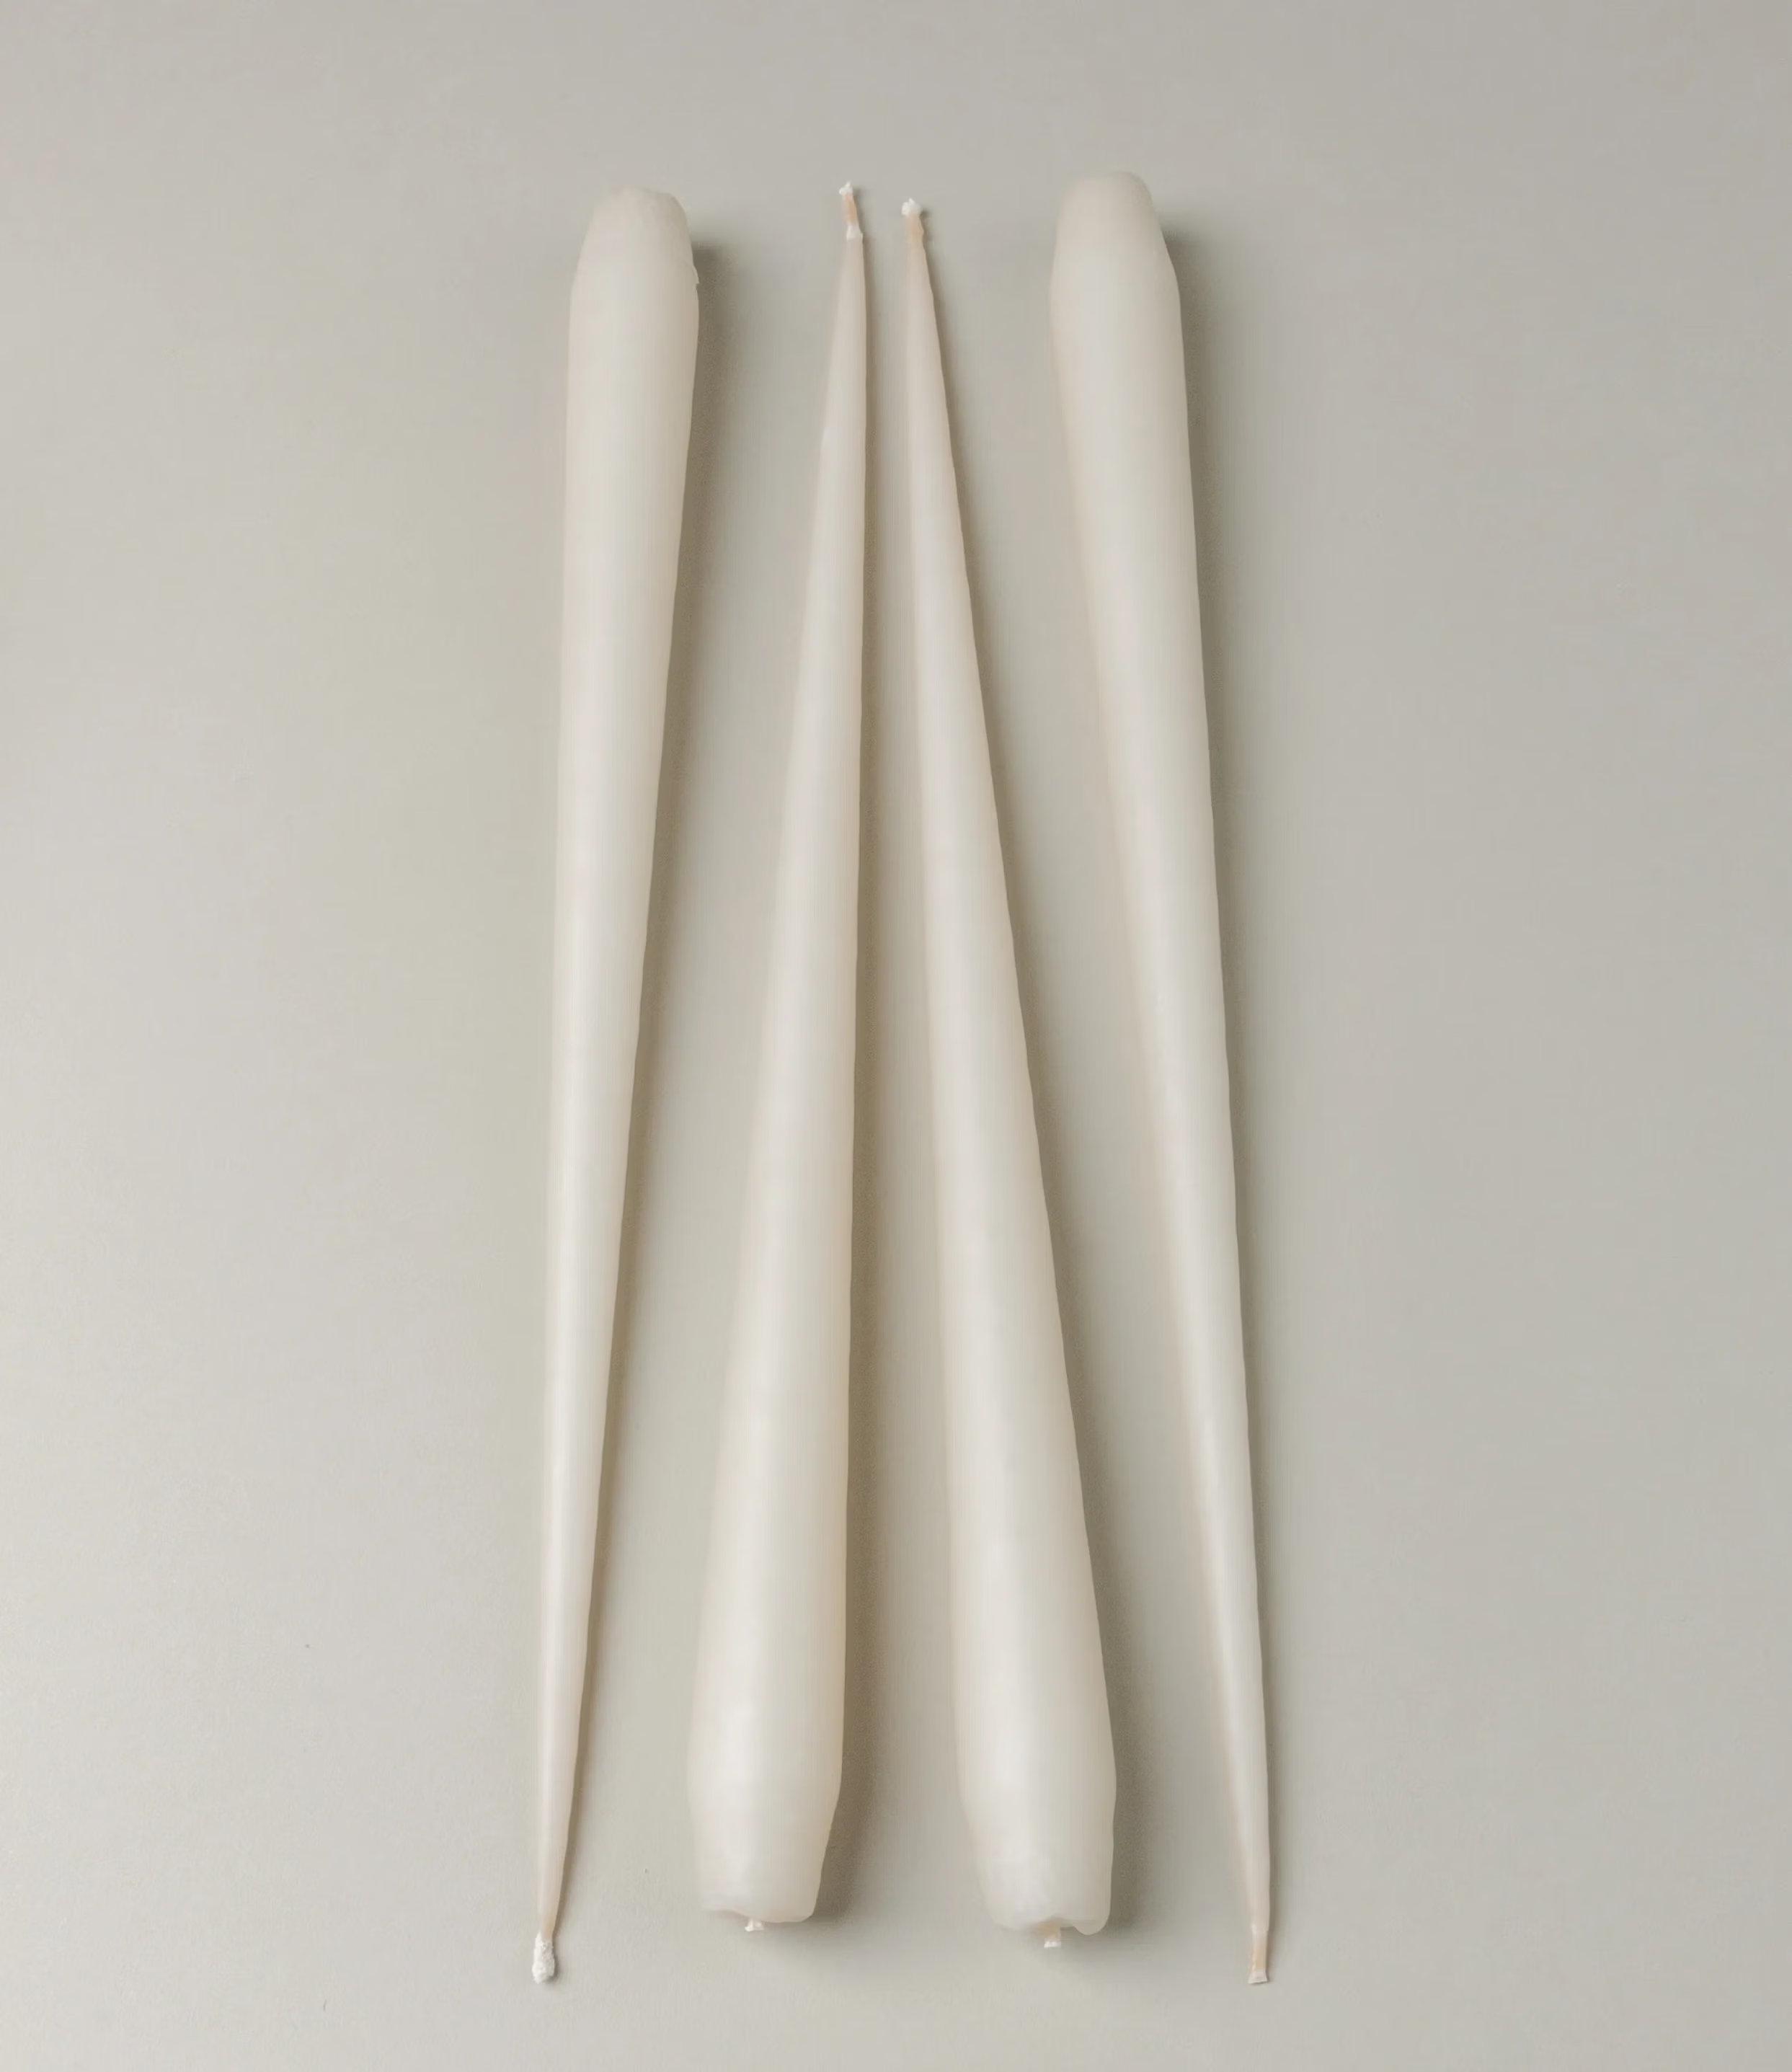 Ester&Erik Taper Candle coming in an ivory shade. The package contains 4 taper candles of the same shade.